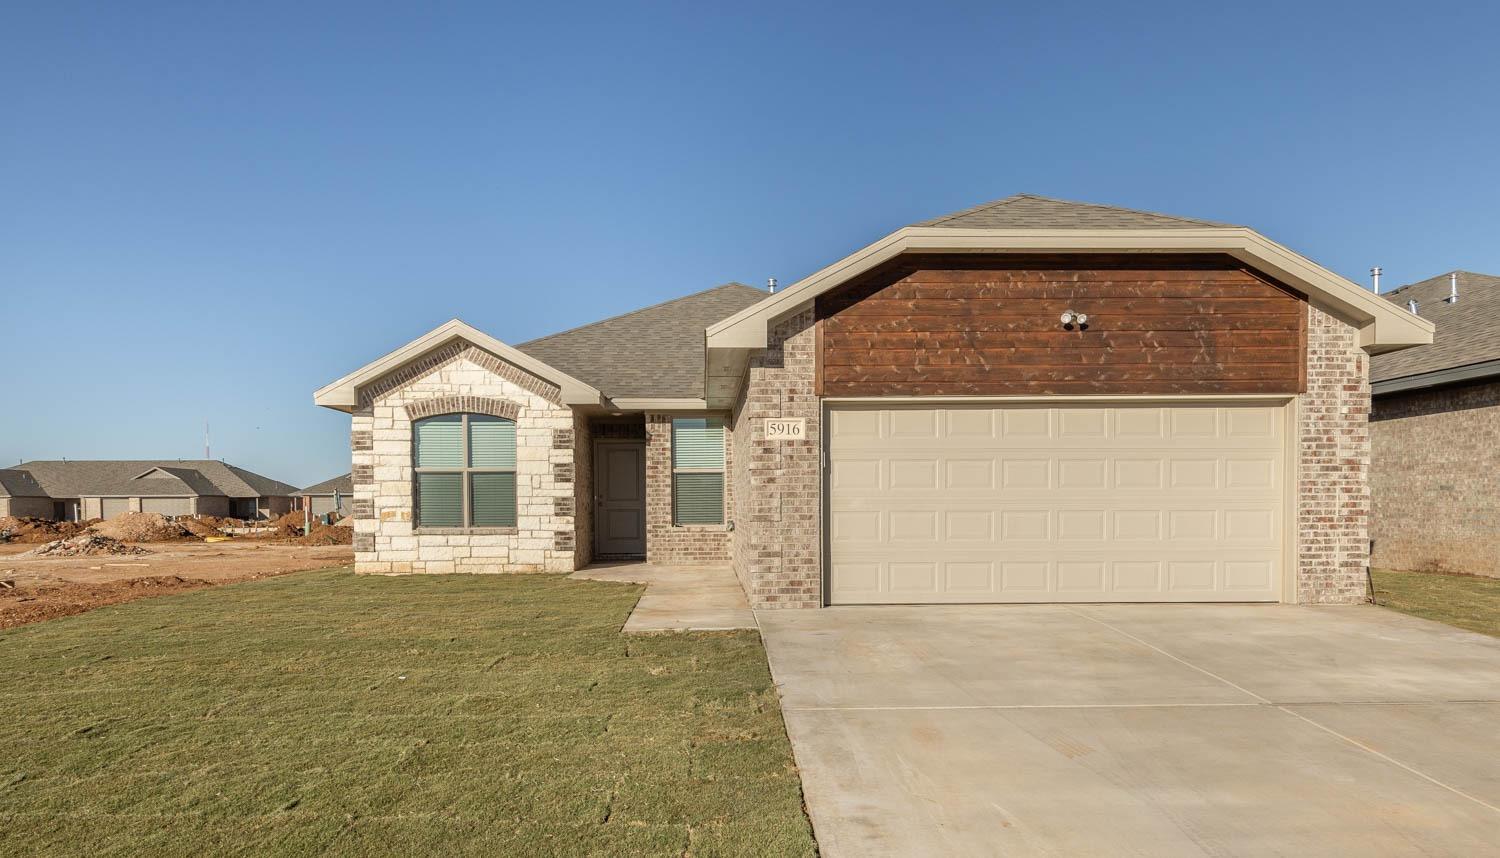 Up to $10,000 Dollars for buyer's closing cost.  The is a new home by Roten Homes, who has been building since 1984. Ready to move in today!  PLUS, $2,000 MORE DOLLARS if you use Revolution Mortgage Lubbock - Ashley Laycock as your loan officer!  BONUS :  SPEC ELECTRIC Company!  The heart of this home is the gourmet kitchen, featuring GAS cooking, ample counter space, and a spacious pantry for all your culinary adventures. The master suite offers a luxurious escape with his and her vanities. Enjoy the privacy of your backyard oasis, complete with a covered patio for outdoor entertaining! Sprinkler systems in front and back yard and with sod. Located in highly sought after neighborhood with outstanding schools! Frenship ISD close to Texas Tech and the medical district. This is one you have to see!